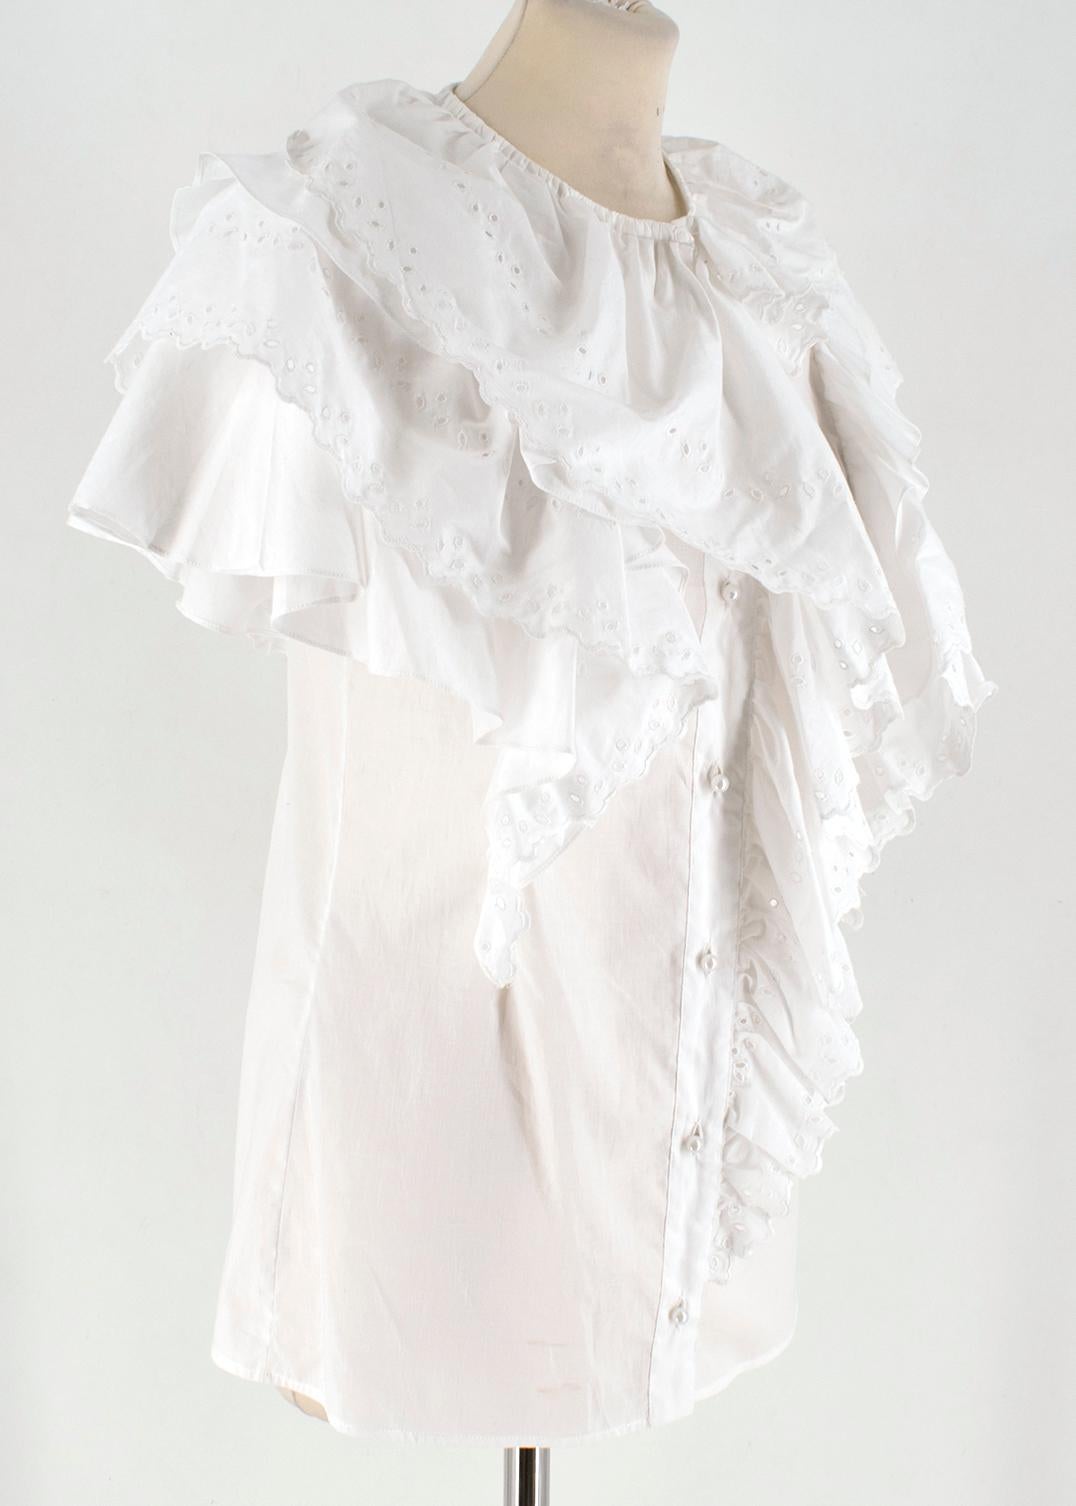 Givenchy White Short Sleeve Ruffled Top 

- Ruffles with embroidered cut outs and hem
- Pearl buttons at the front for closure
- Round neckline

Please note, these items are pre-owned and may show signs of being stored even when unworn and unused.